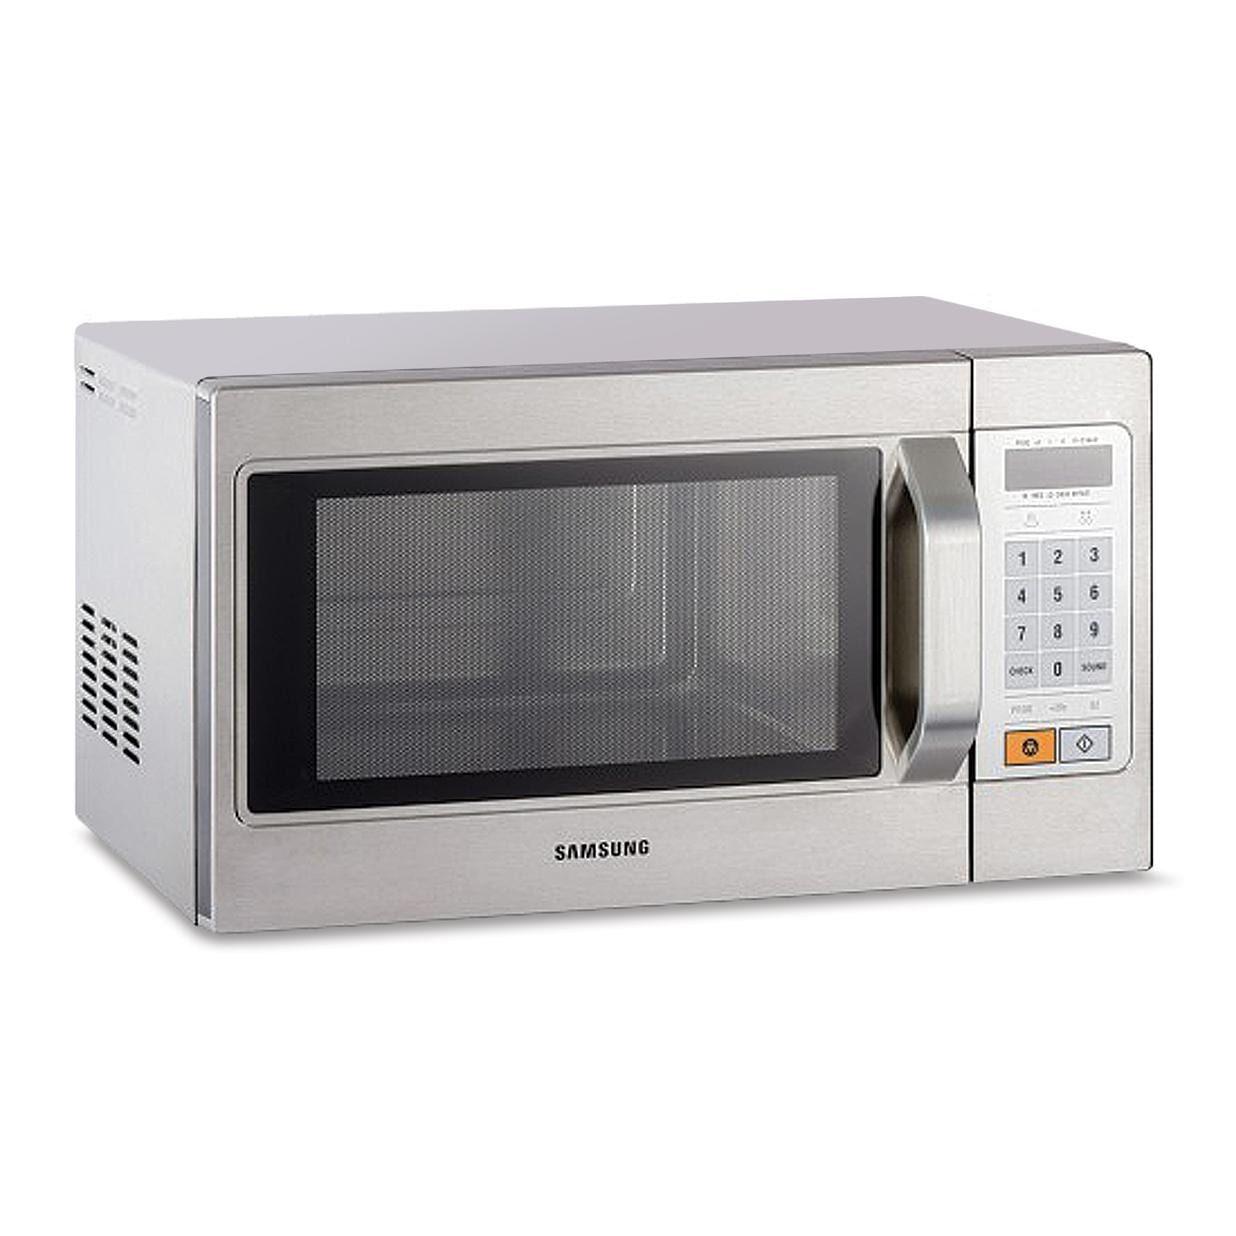 CM1089A COMMERCIAL MICROWAVE OVEN 1100 WATT - Used Pub and Hotel Equipment